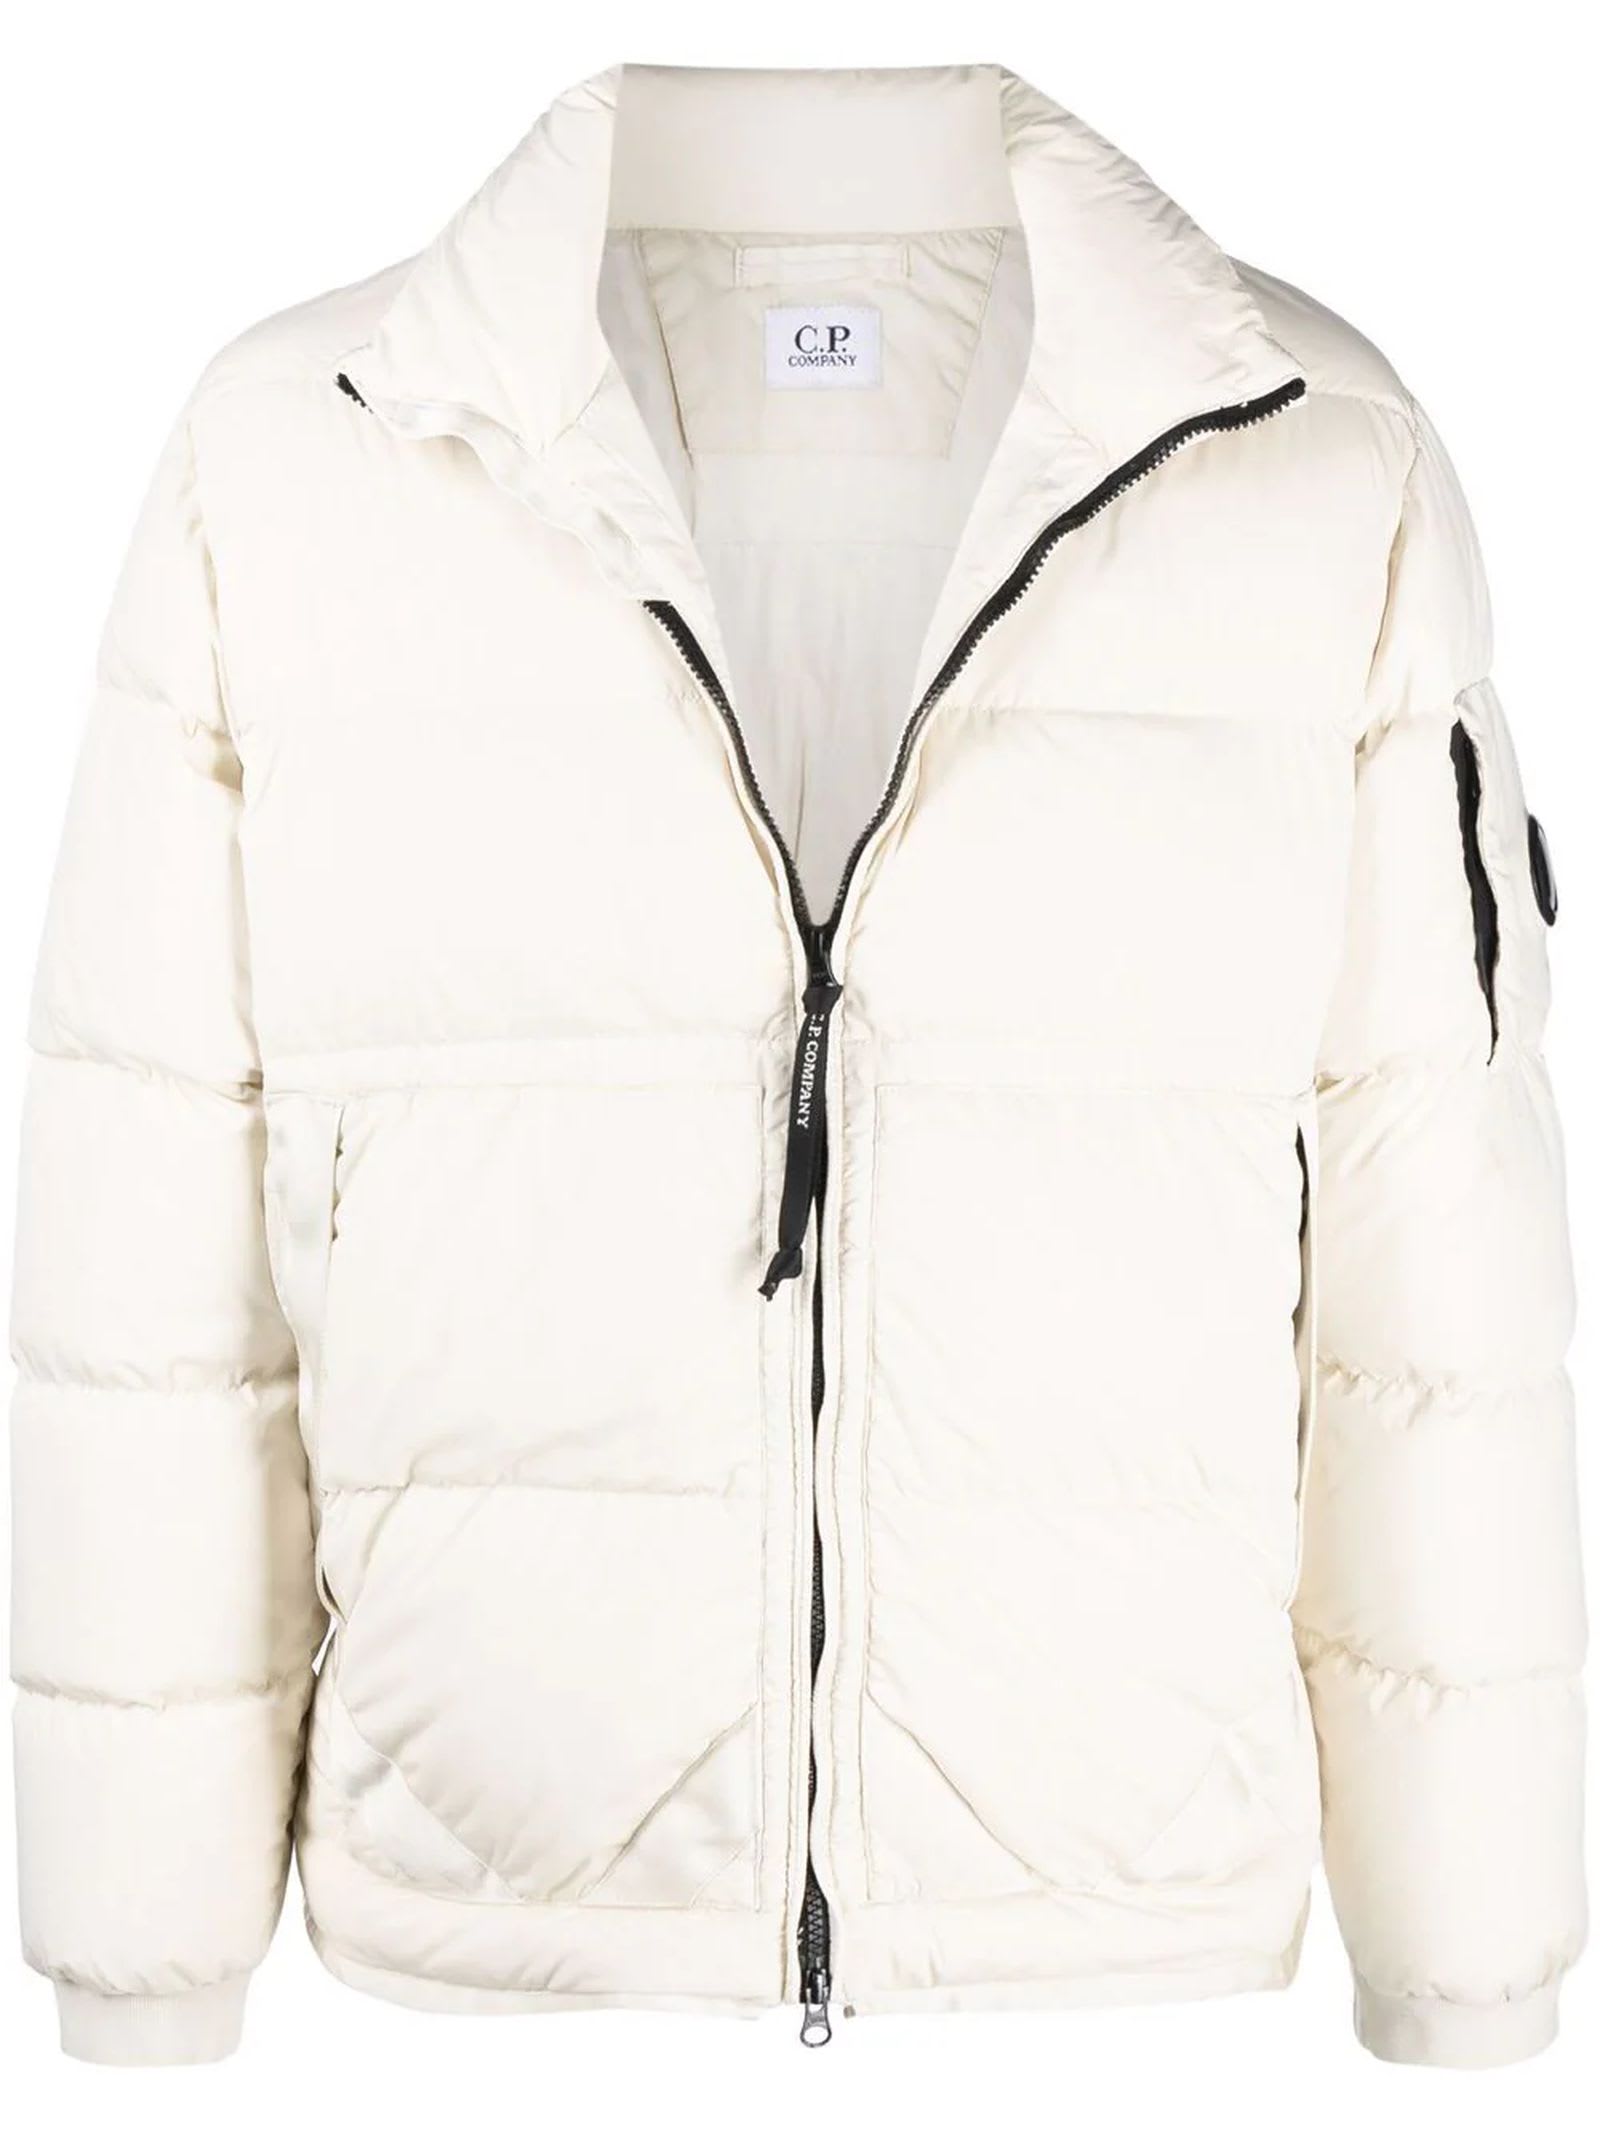 C.P. Company White Feather Down Jacket